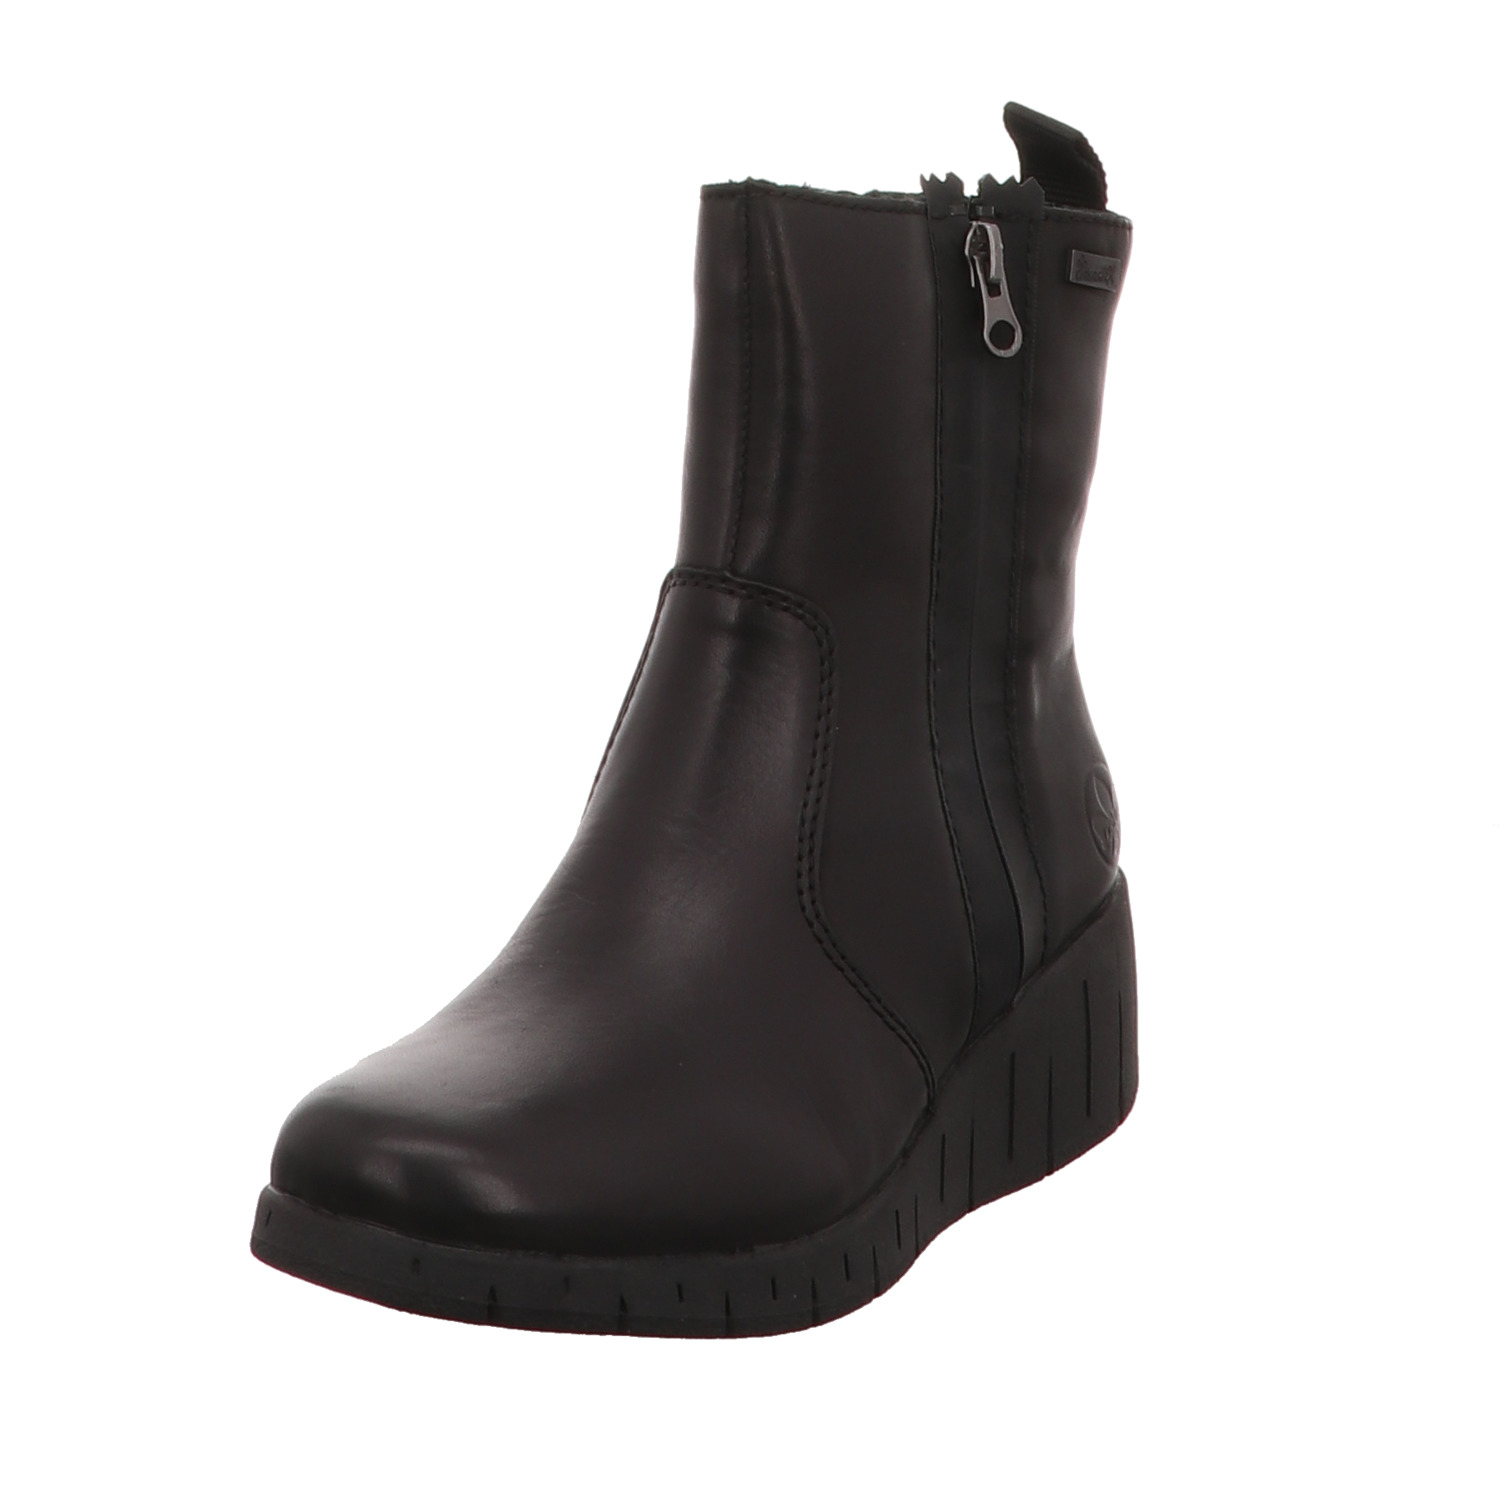 Rieker Boots Y1364-01